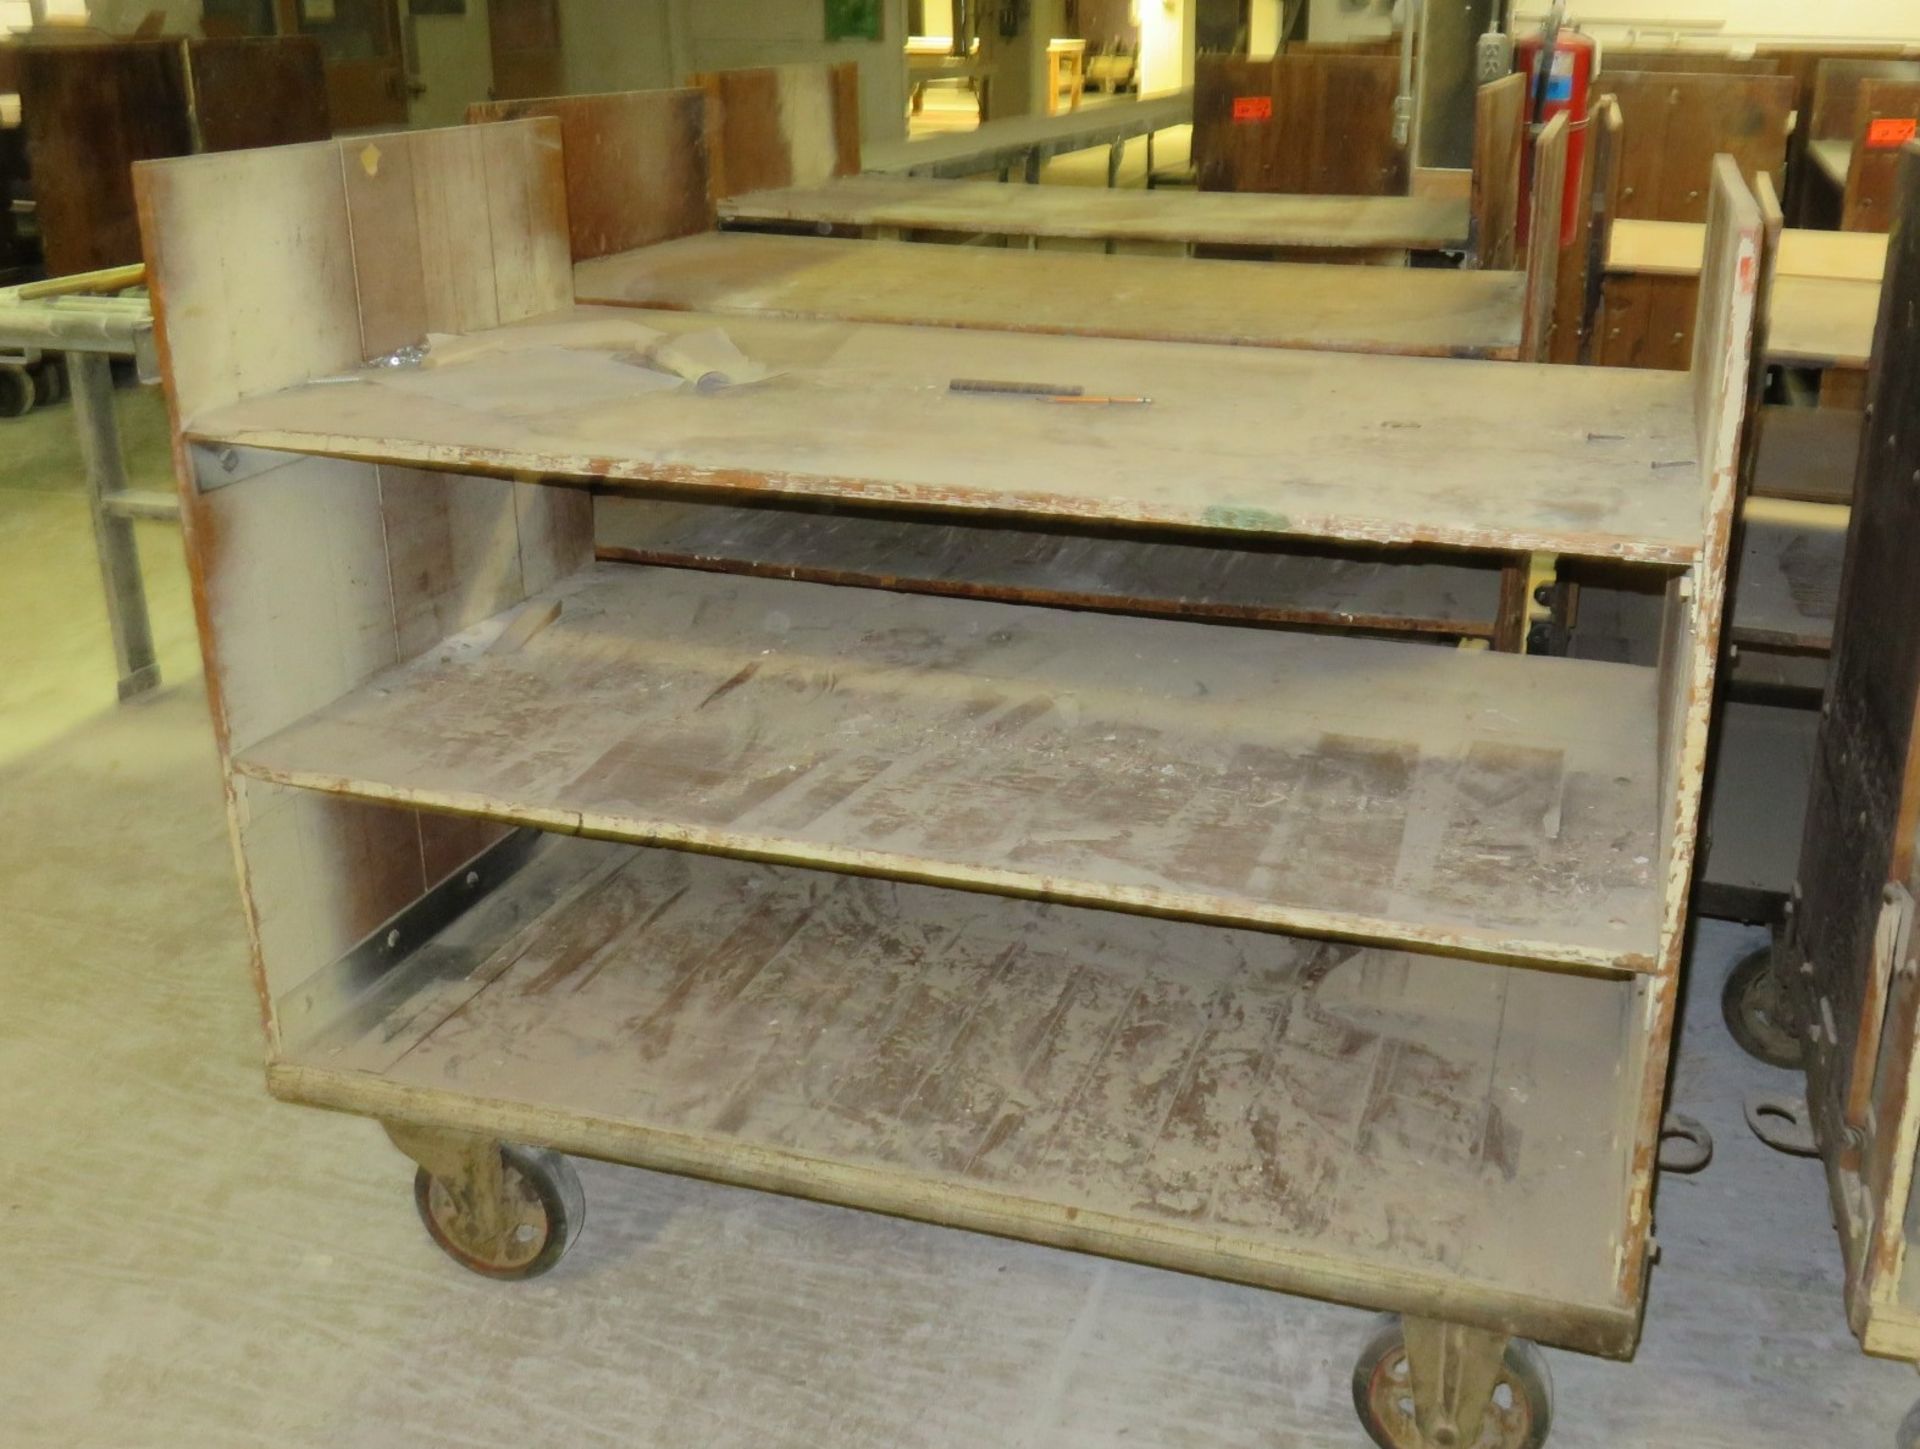 Lot of 3 Shelved Railroad Carts approx 60" x 30" x 52"